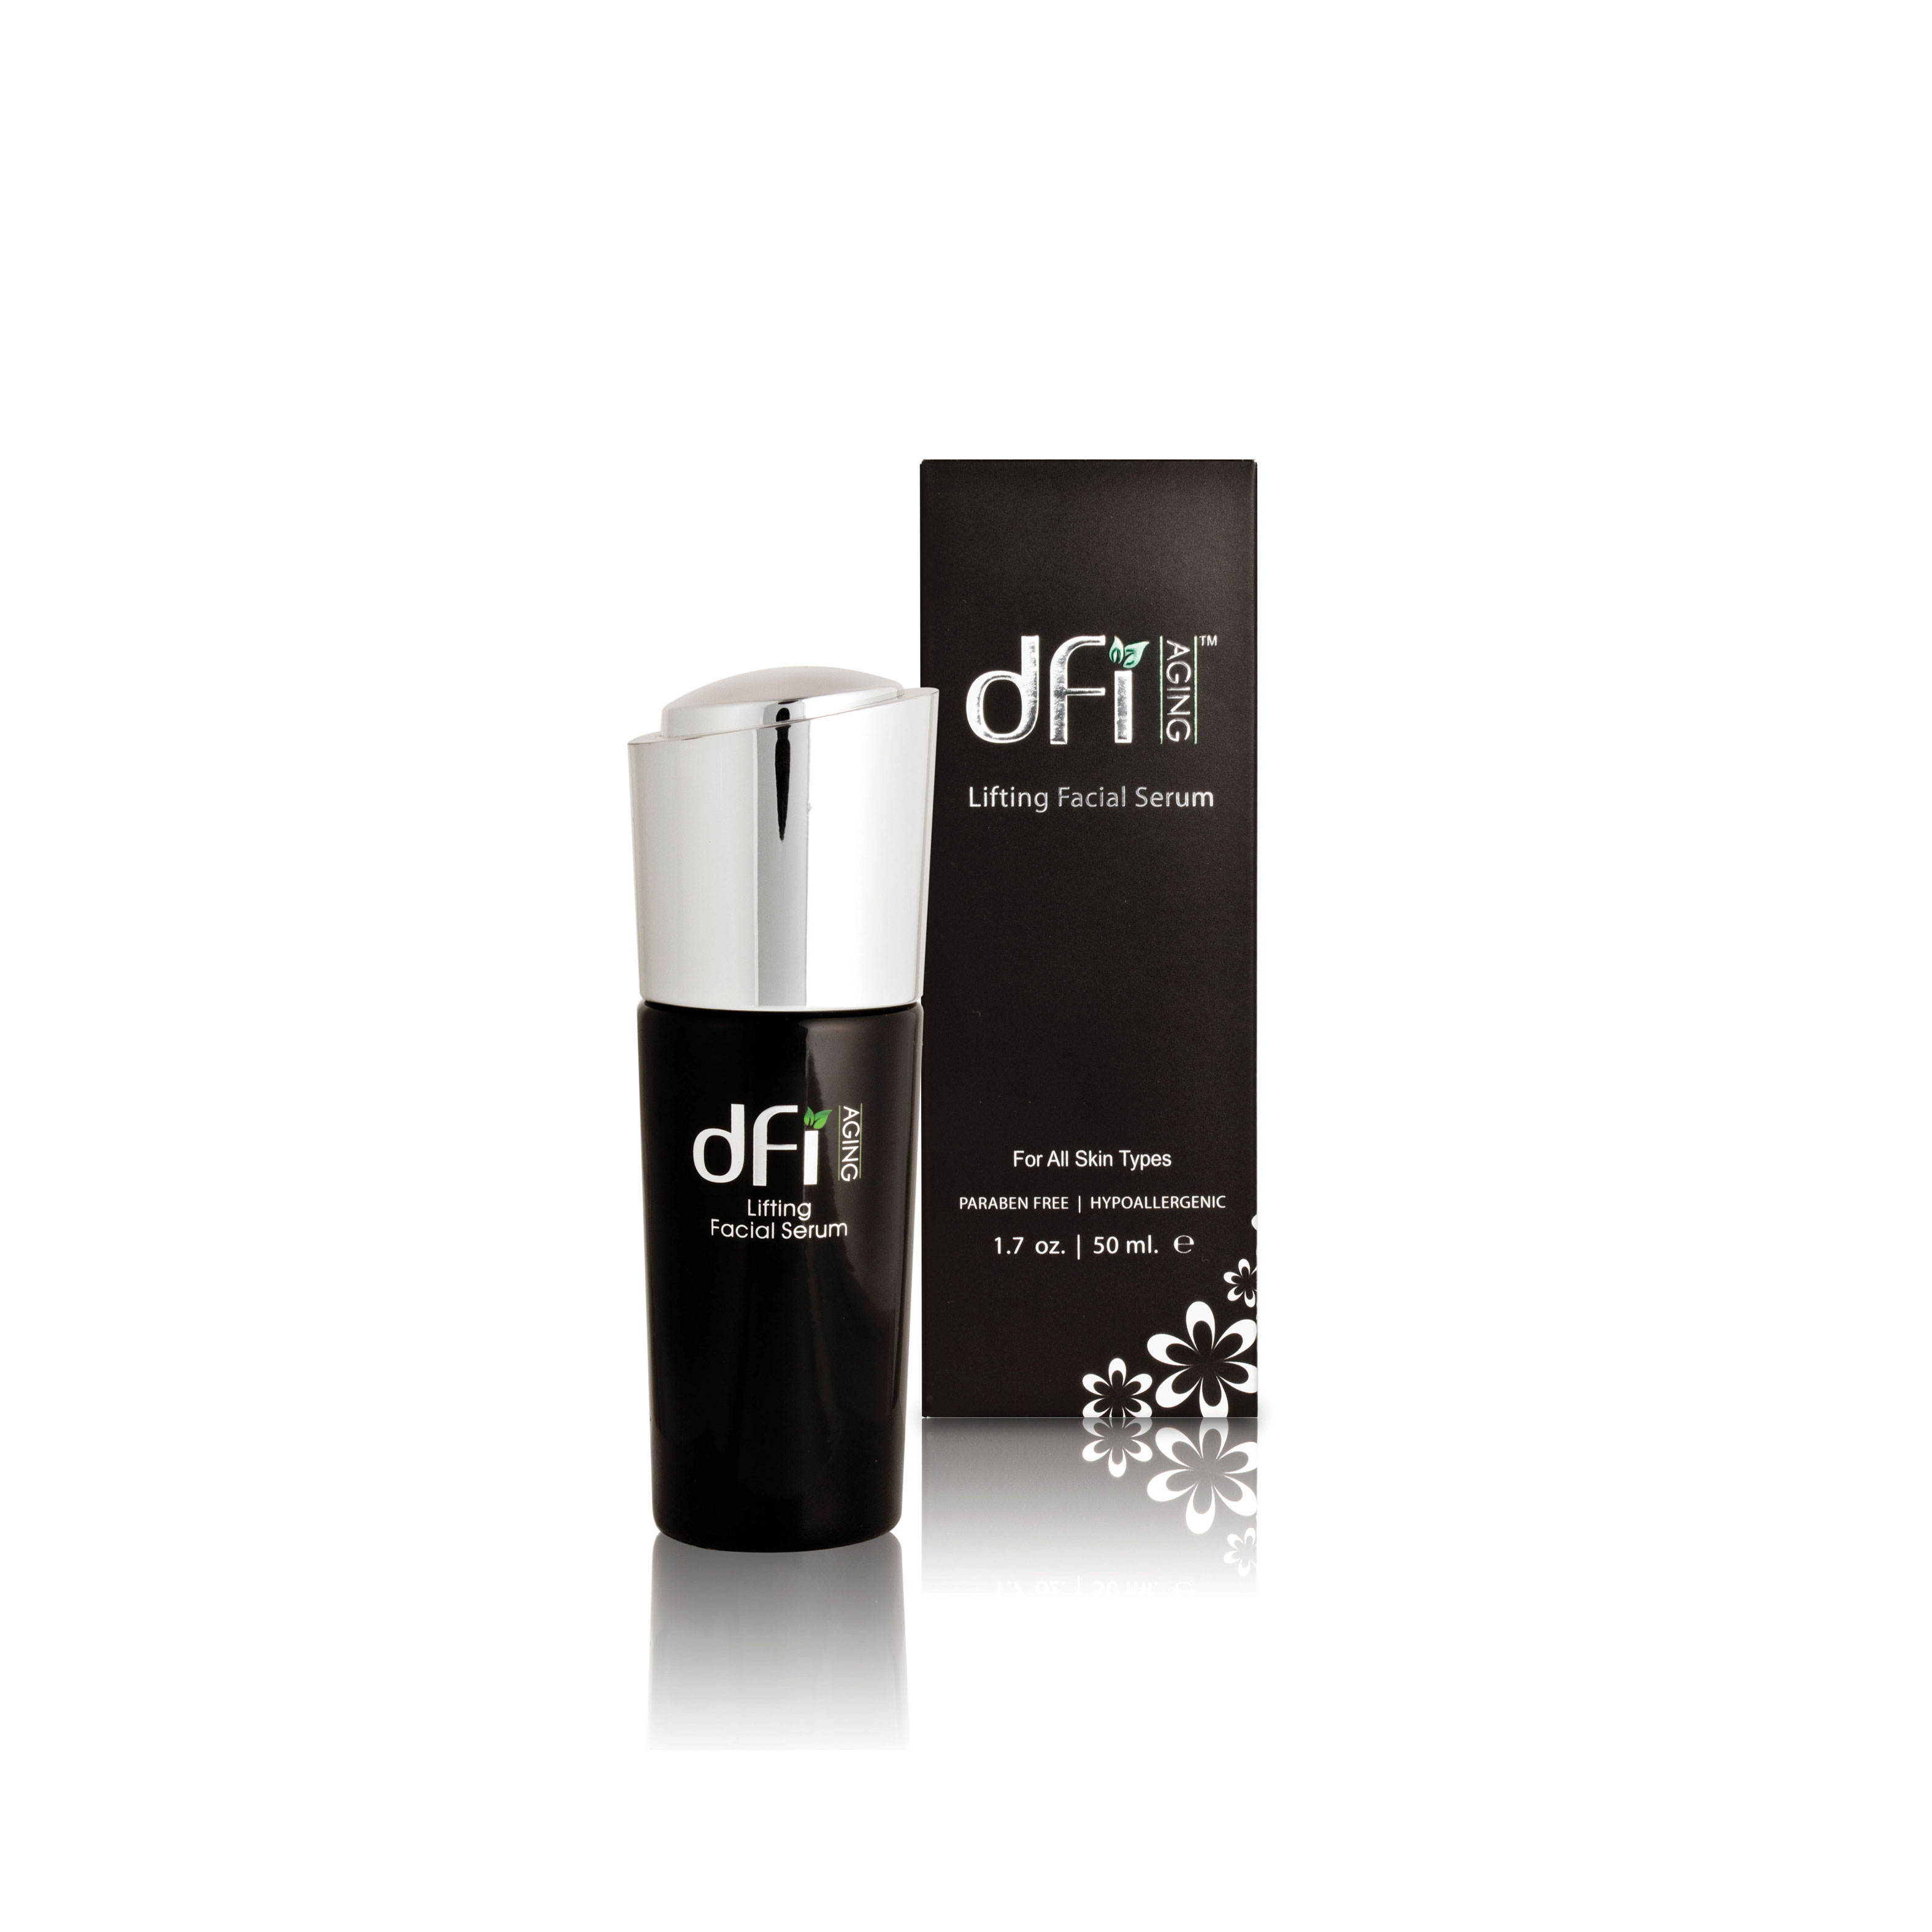 Product Branding and Packaging Design for dfi Aging Skincare's Lifting Facial Serum